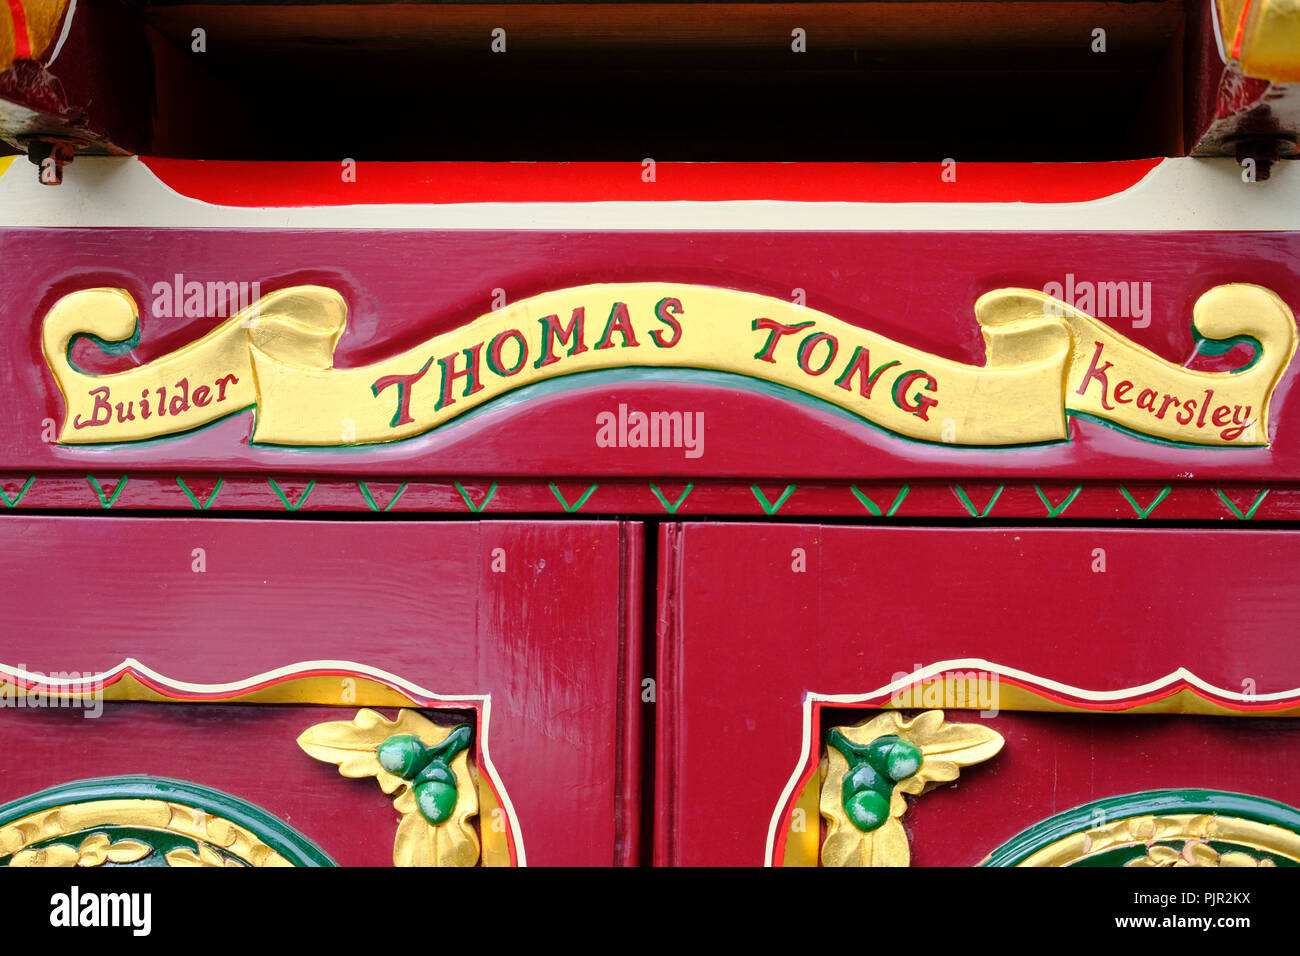 Builder's mark on a traditional Gypsy caravan. Thomas Tong of Kearsley was a family firm in Bolton, Lancashire in late 1800s Stock Photo